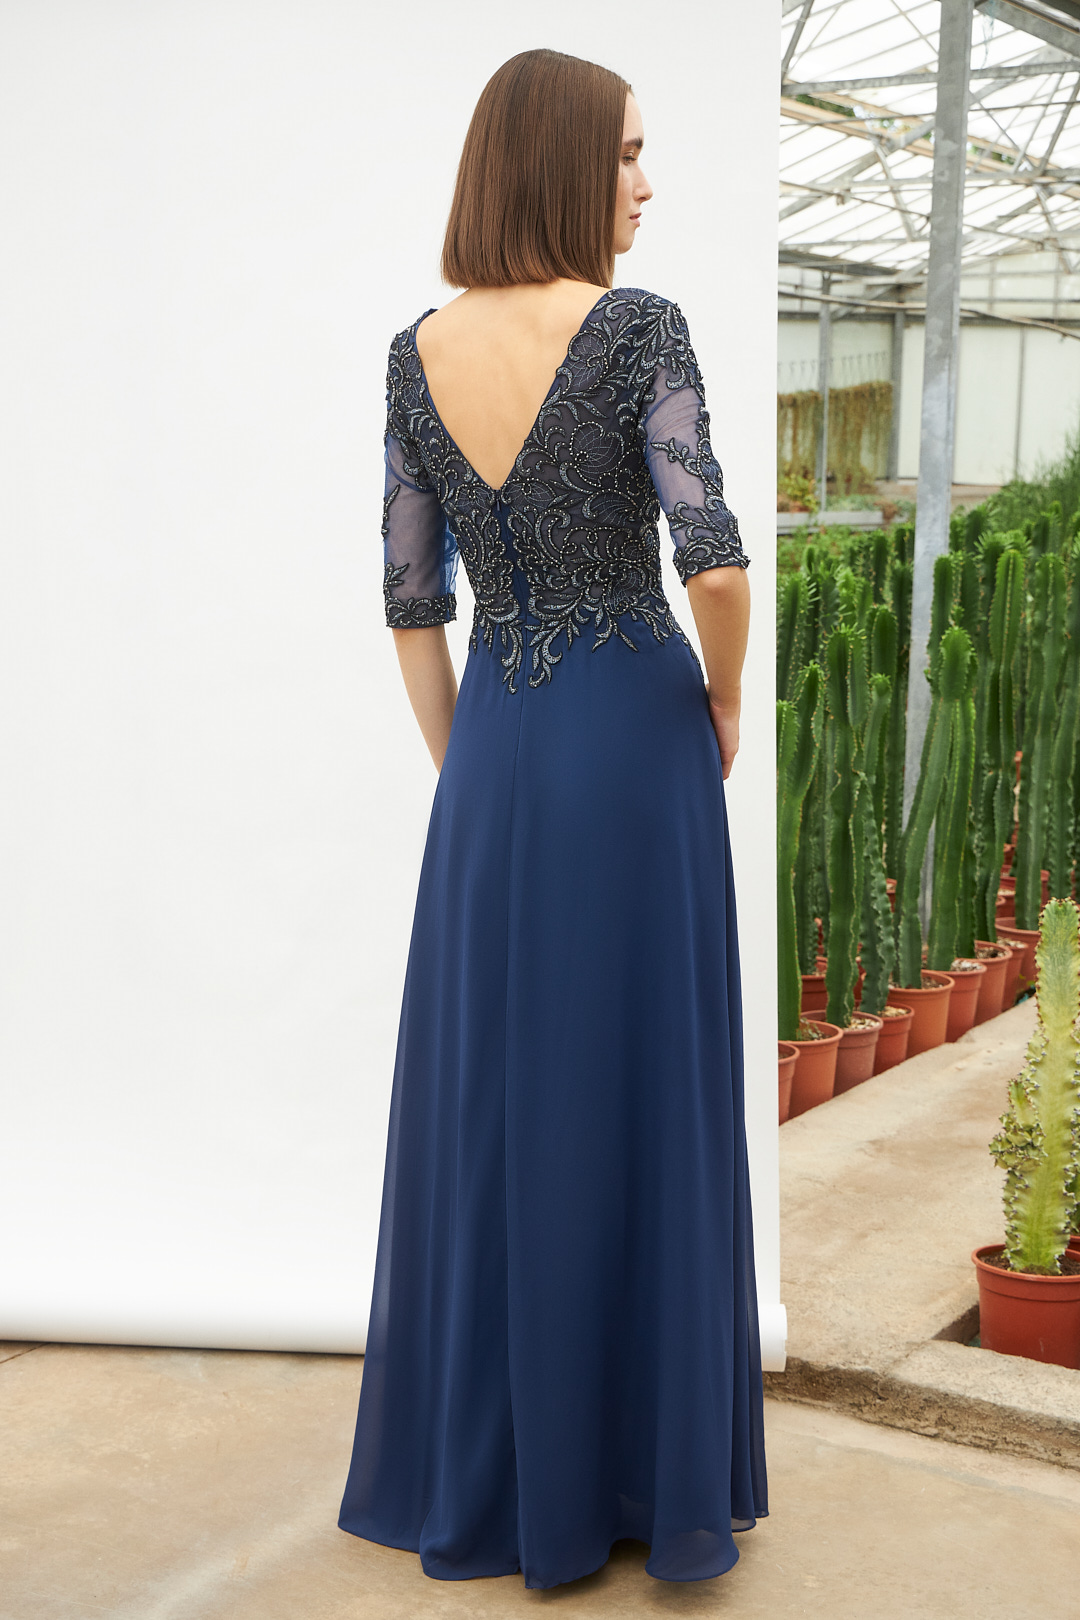 Classic Dresses / Long classic chiffon dress with beaded top and sleeves